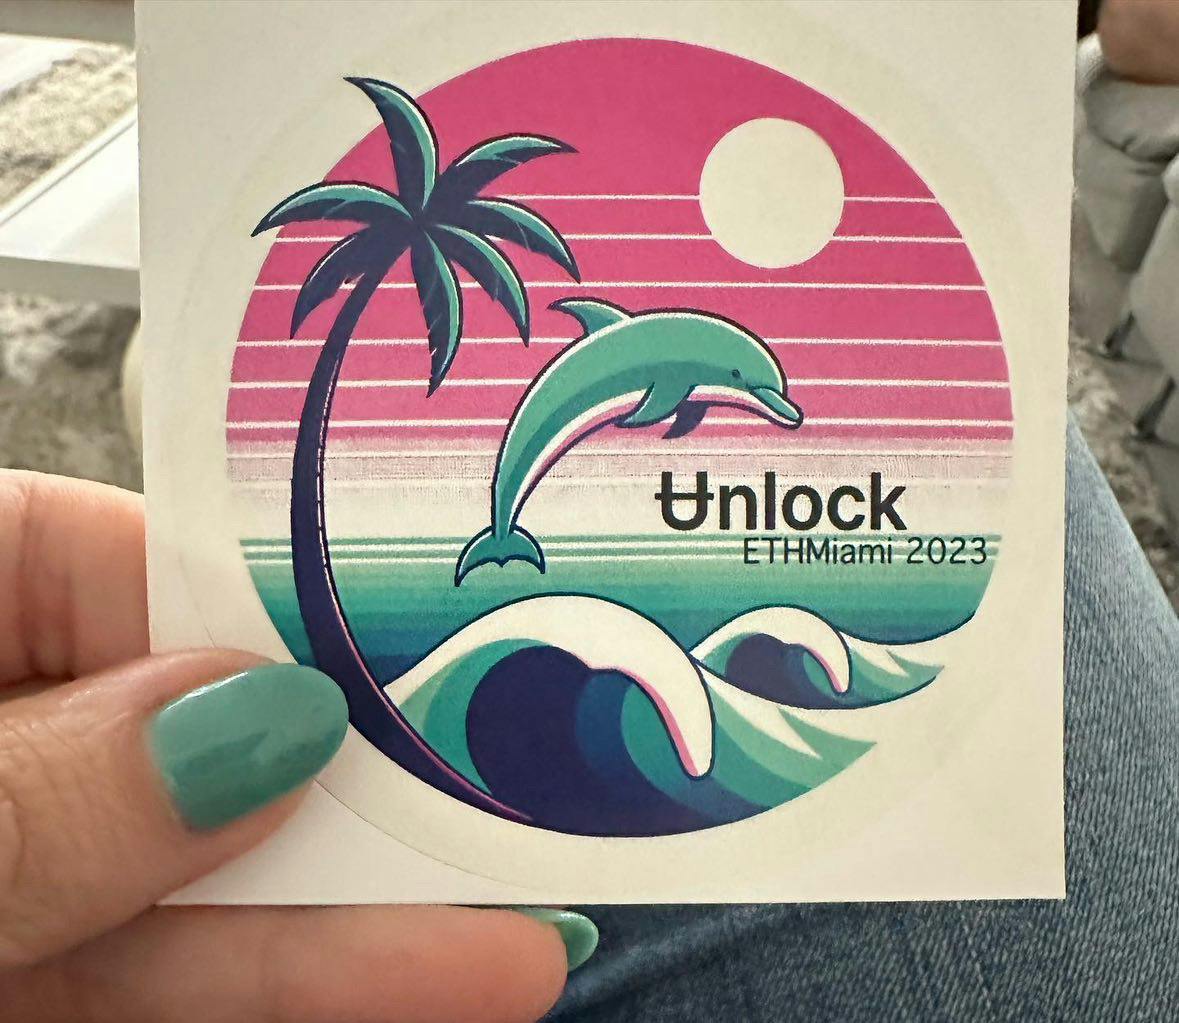 Unlock's event-specific sticker was a hit among attendees 